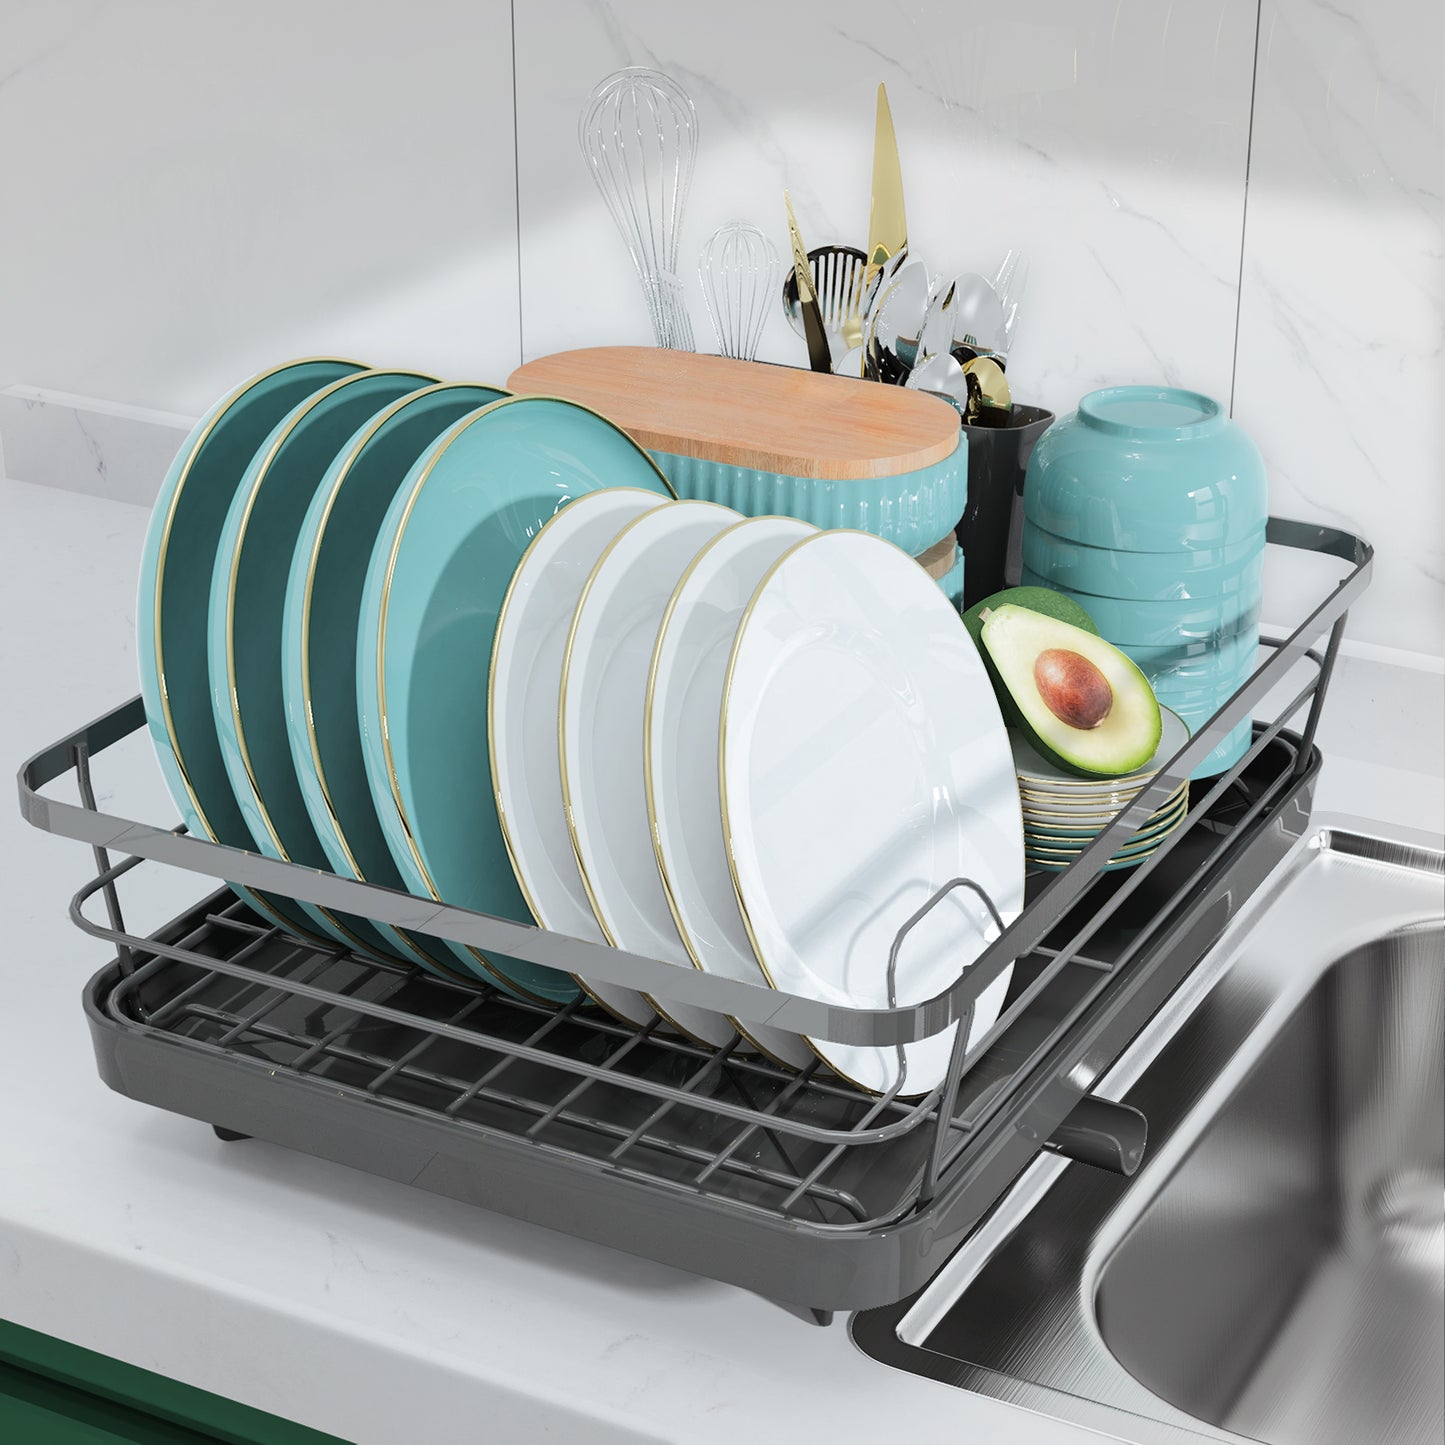 Sakugi Dish Drying Rack - Compact Dish Rack for Kitchen Counter with a Cutlery Holder, Durable Stainless Steel Kitchen Dish Rack for Various Tableware, Dish Drying Rack with Easy Installation, Grey